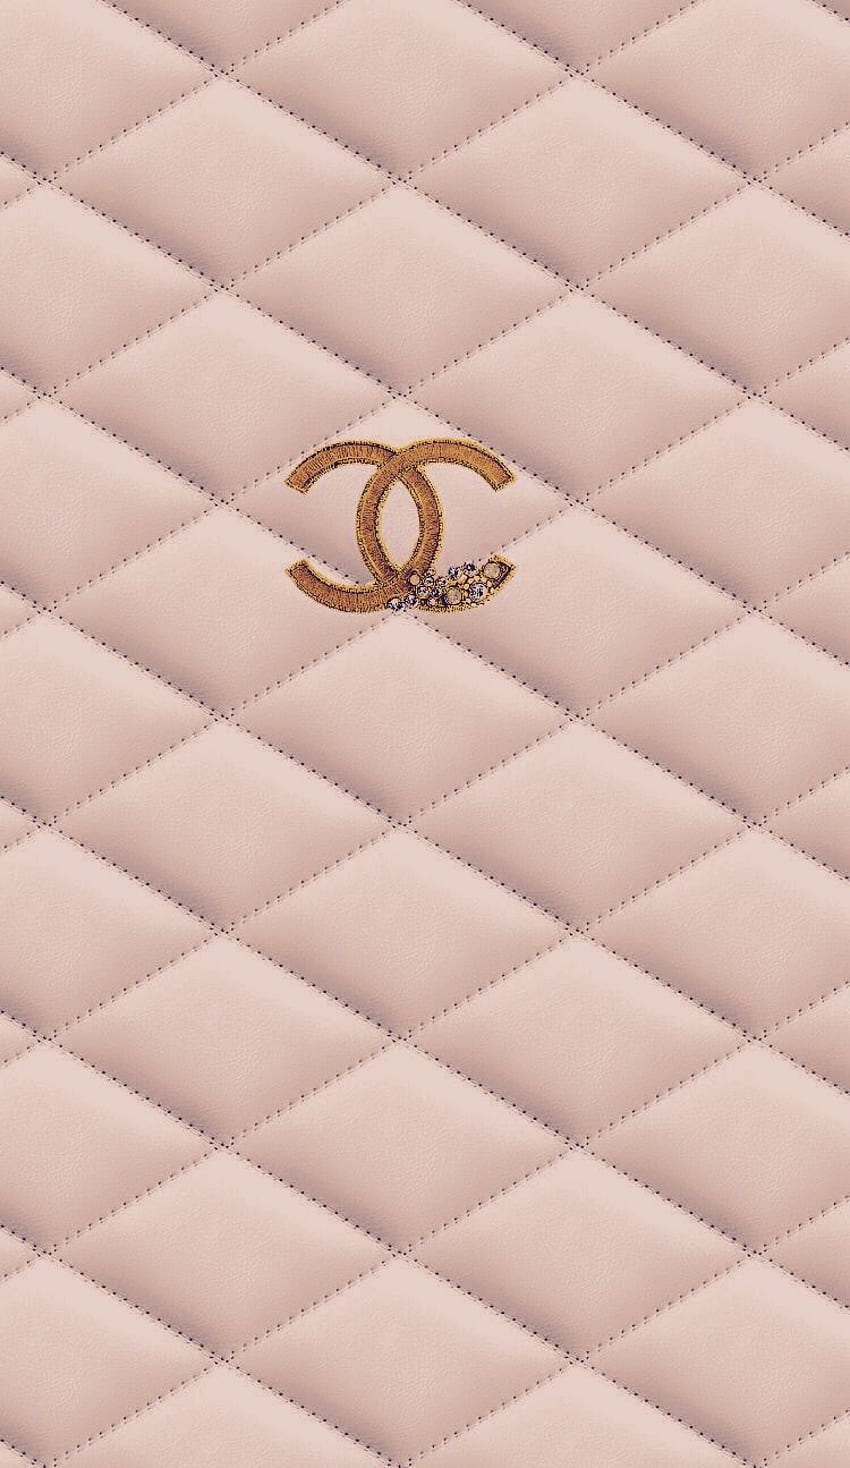 Chanel // Fond d'ecran // iPhone // Tendance // Fashion // Life Style iPhone 6s Plus. Chanel , Gold background, Rose gold, Simple Leather 6 HD phone wallpaper